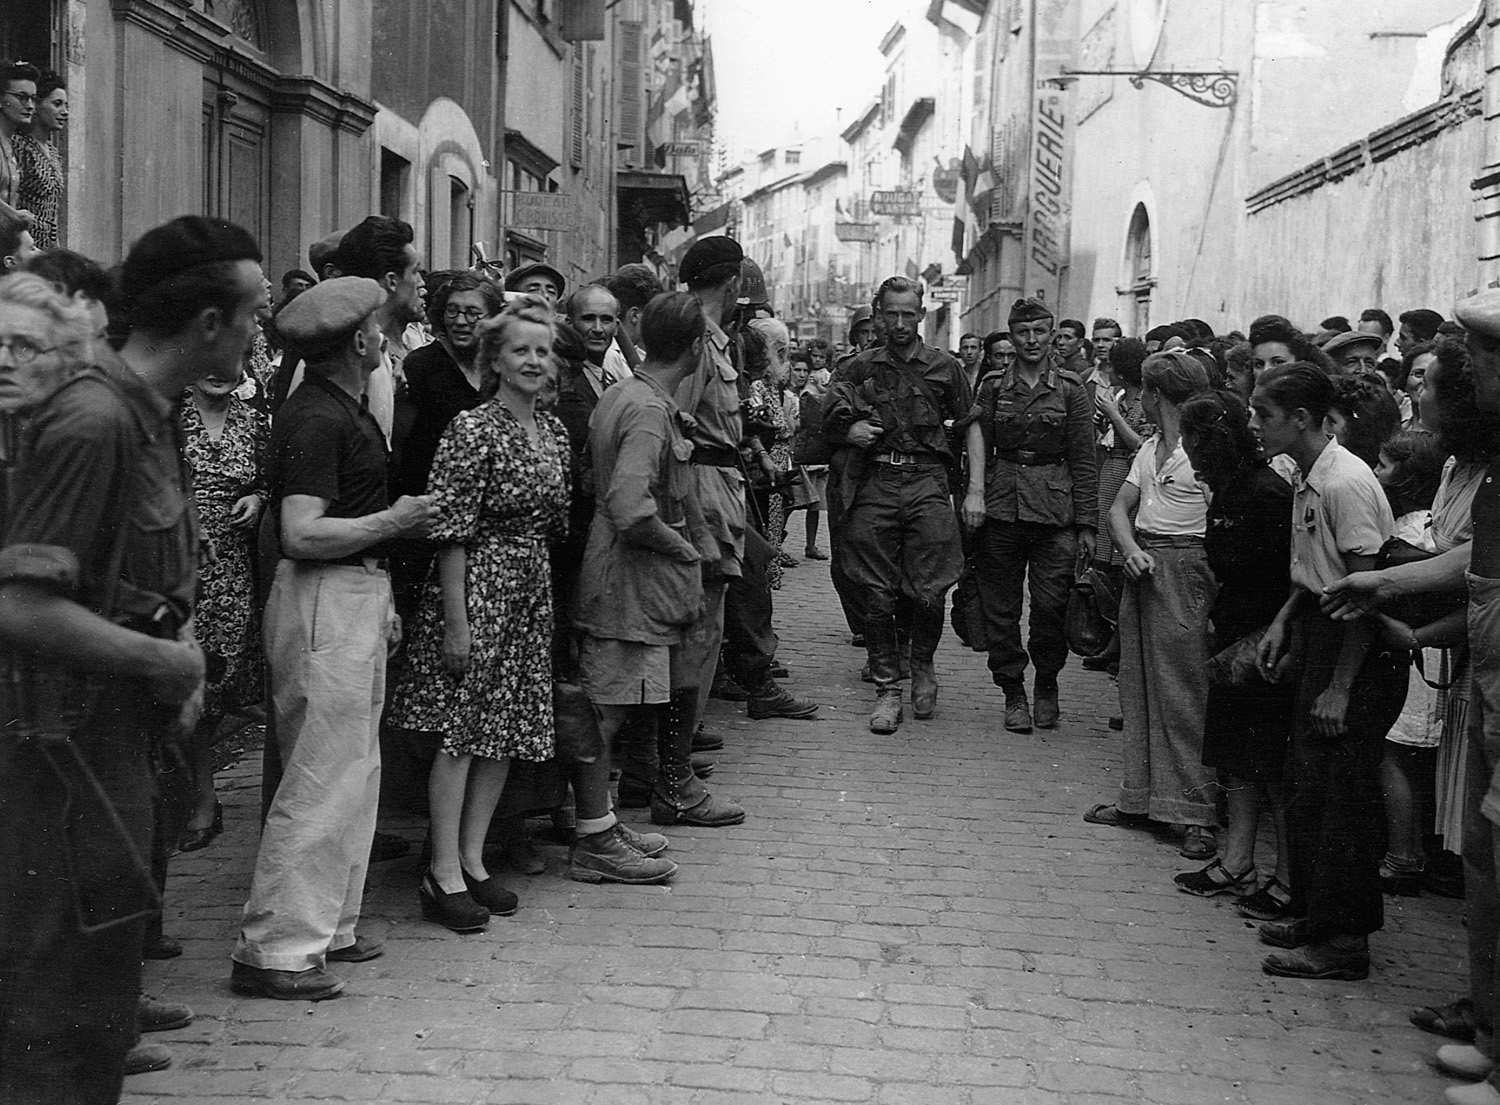 Captured German snipers are marched down a street before a crowd of onlooking citizens in Montelimar.